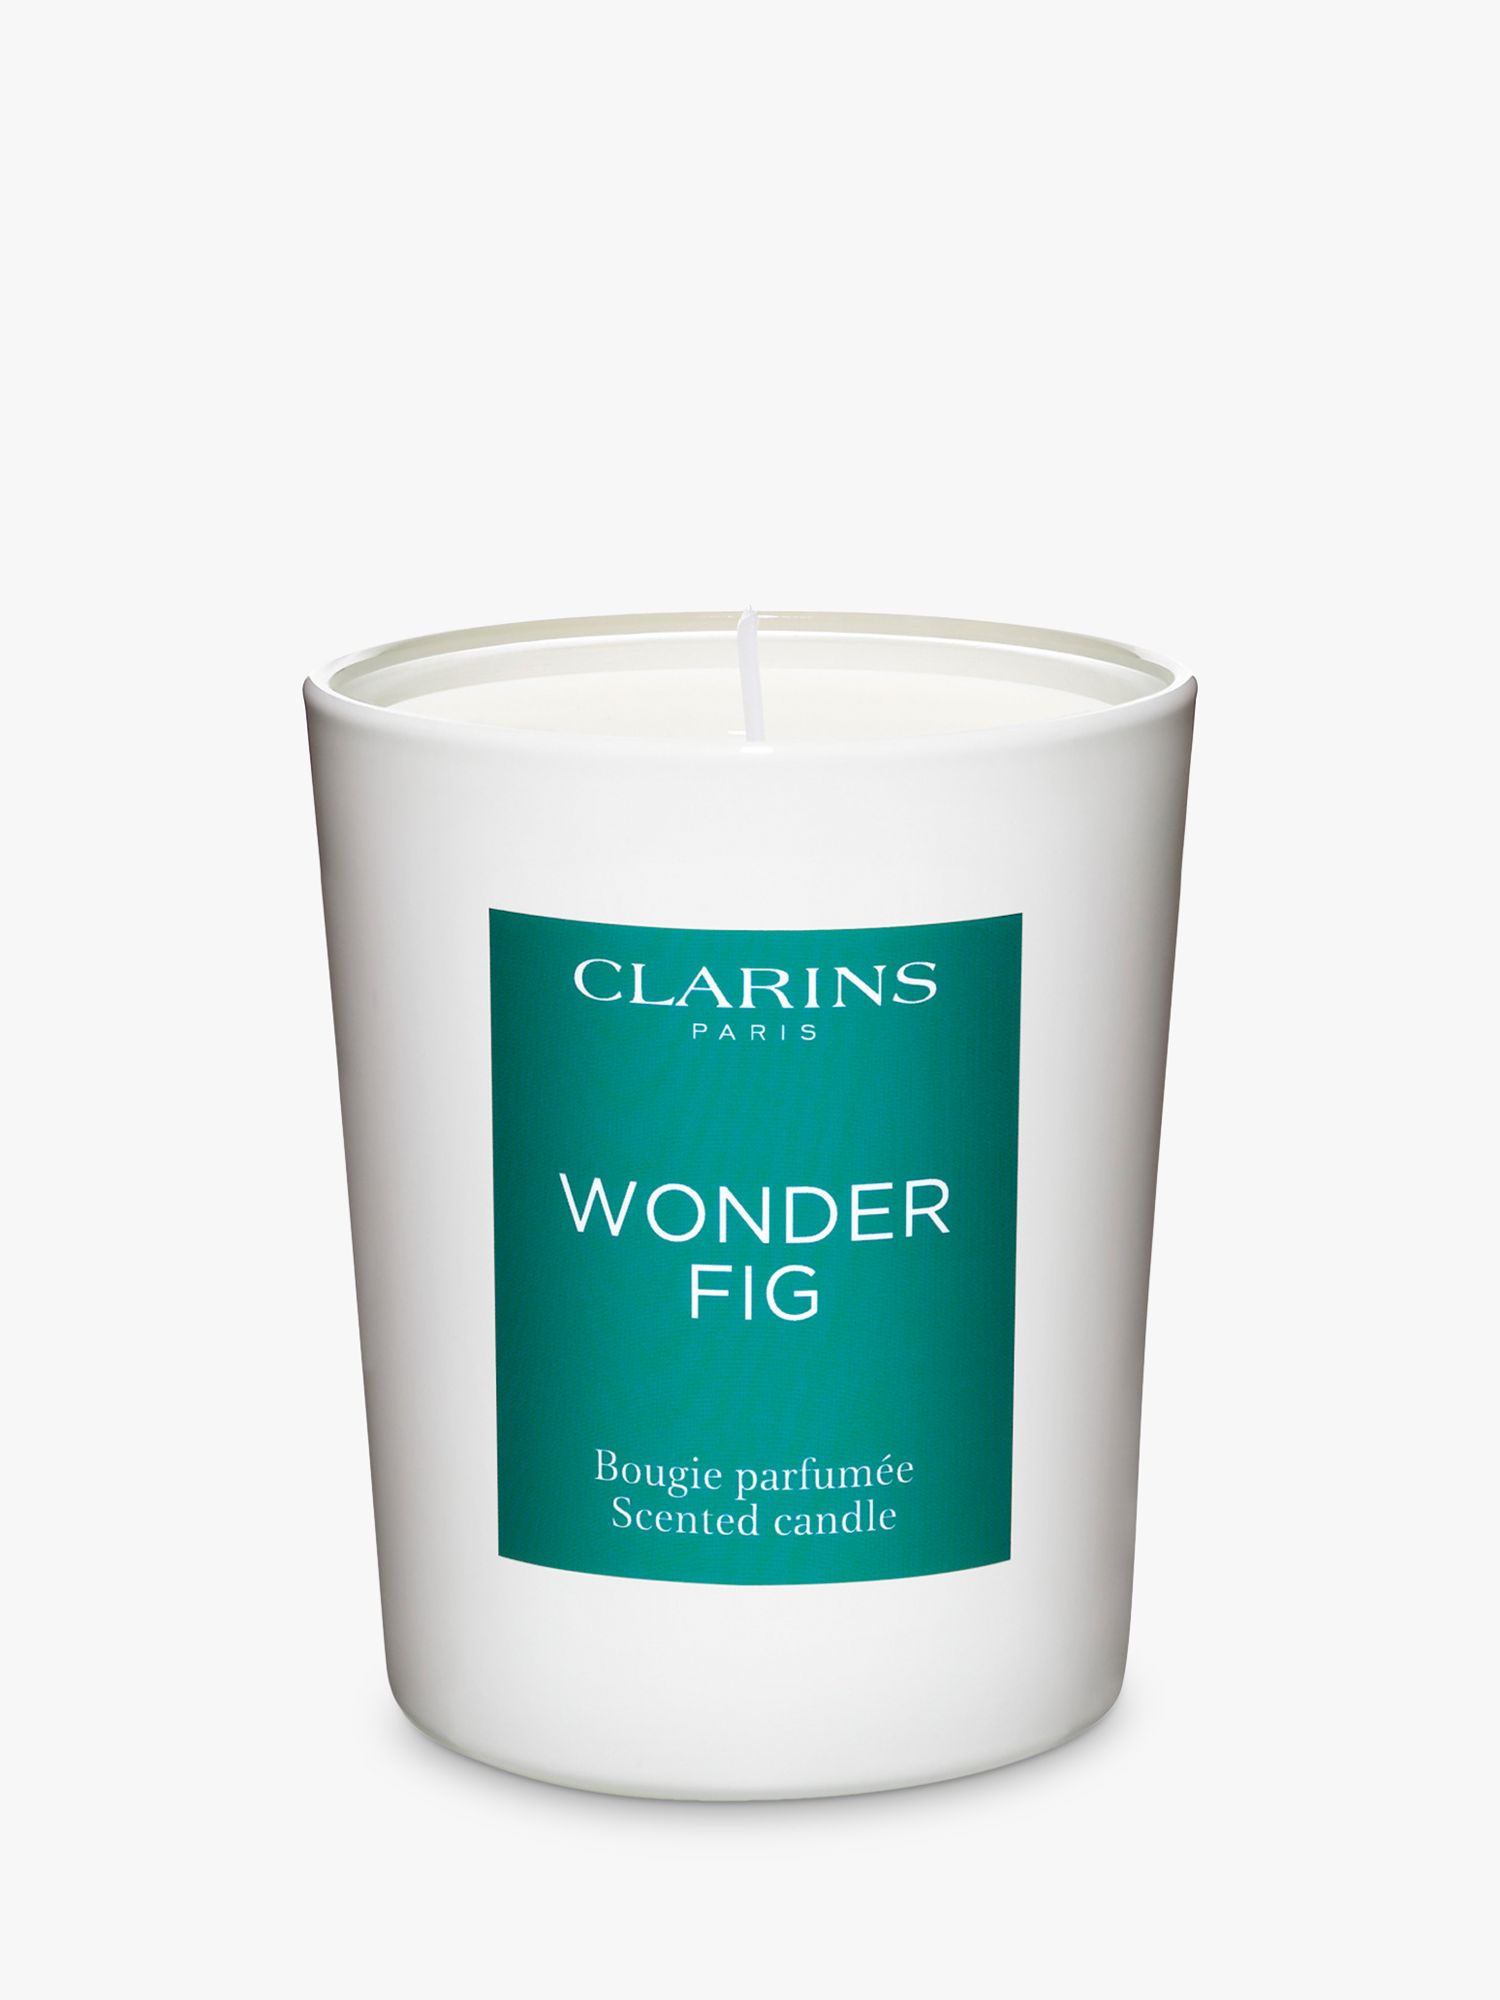 Clarins Wonder Fig Scented Candle, 180g